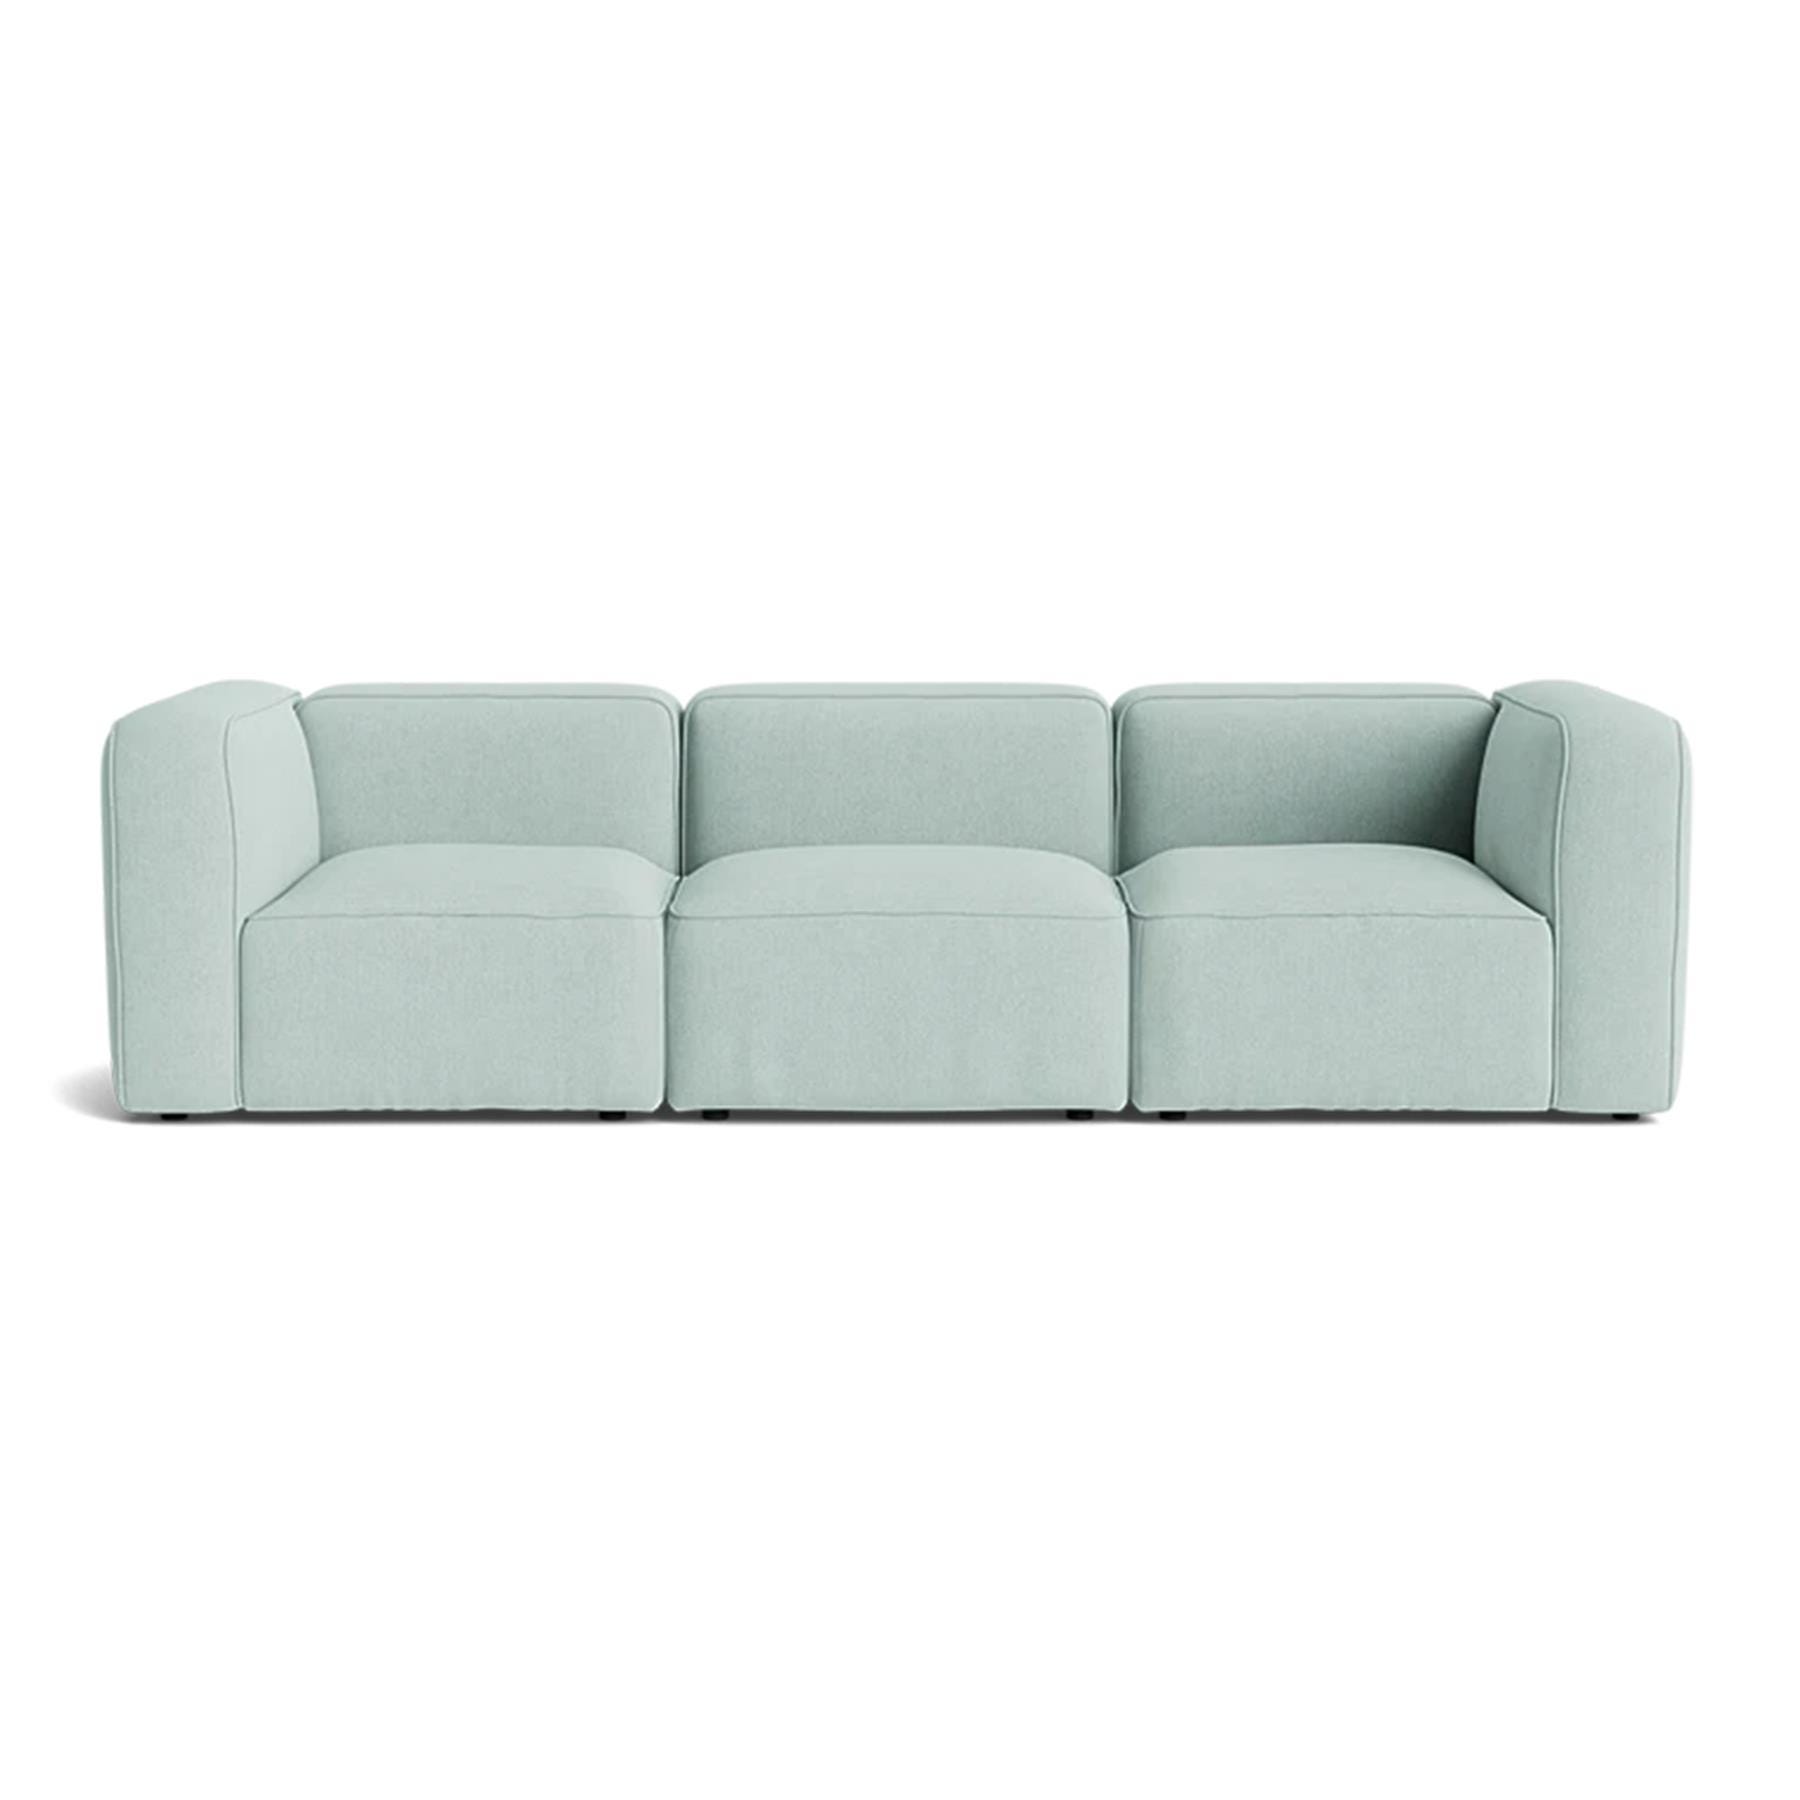 Make Nordic Basecamp 3 Seater Sofa Fiord 721 Blue Designer Furniture From Holloways Of Ludlow